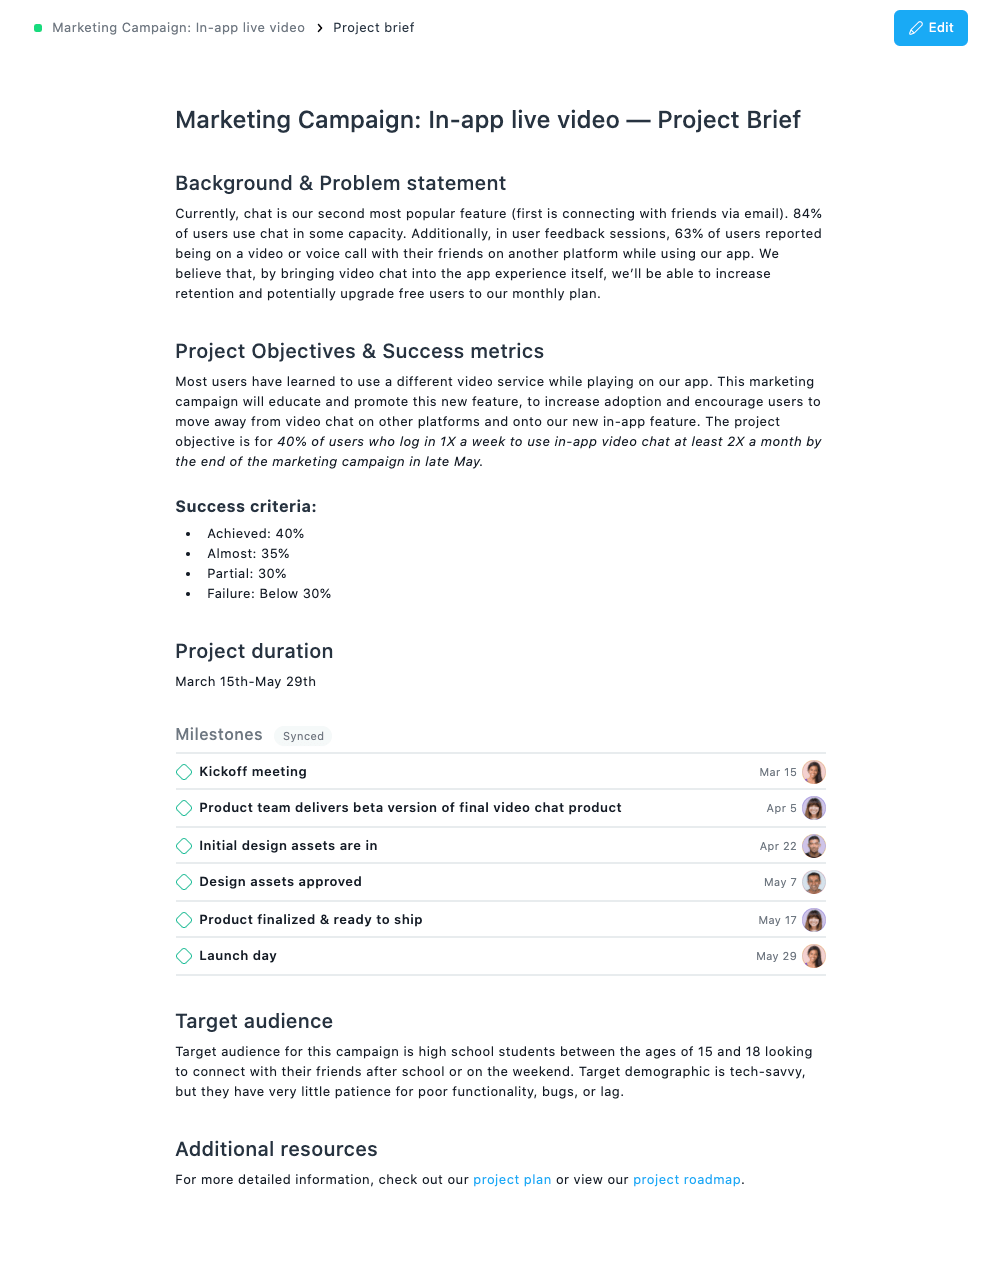 [Product UI] Marketing campaign project brief (Project Brief)